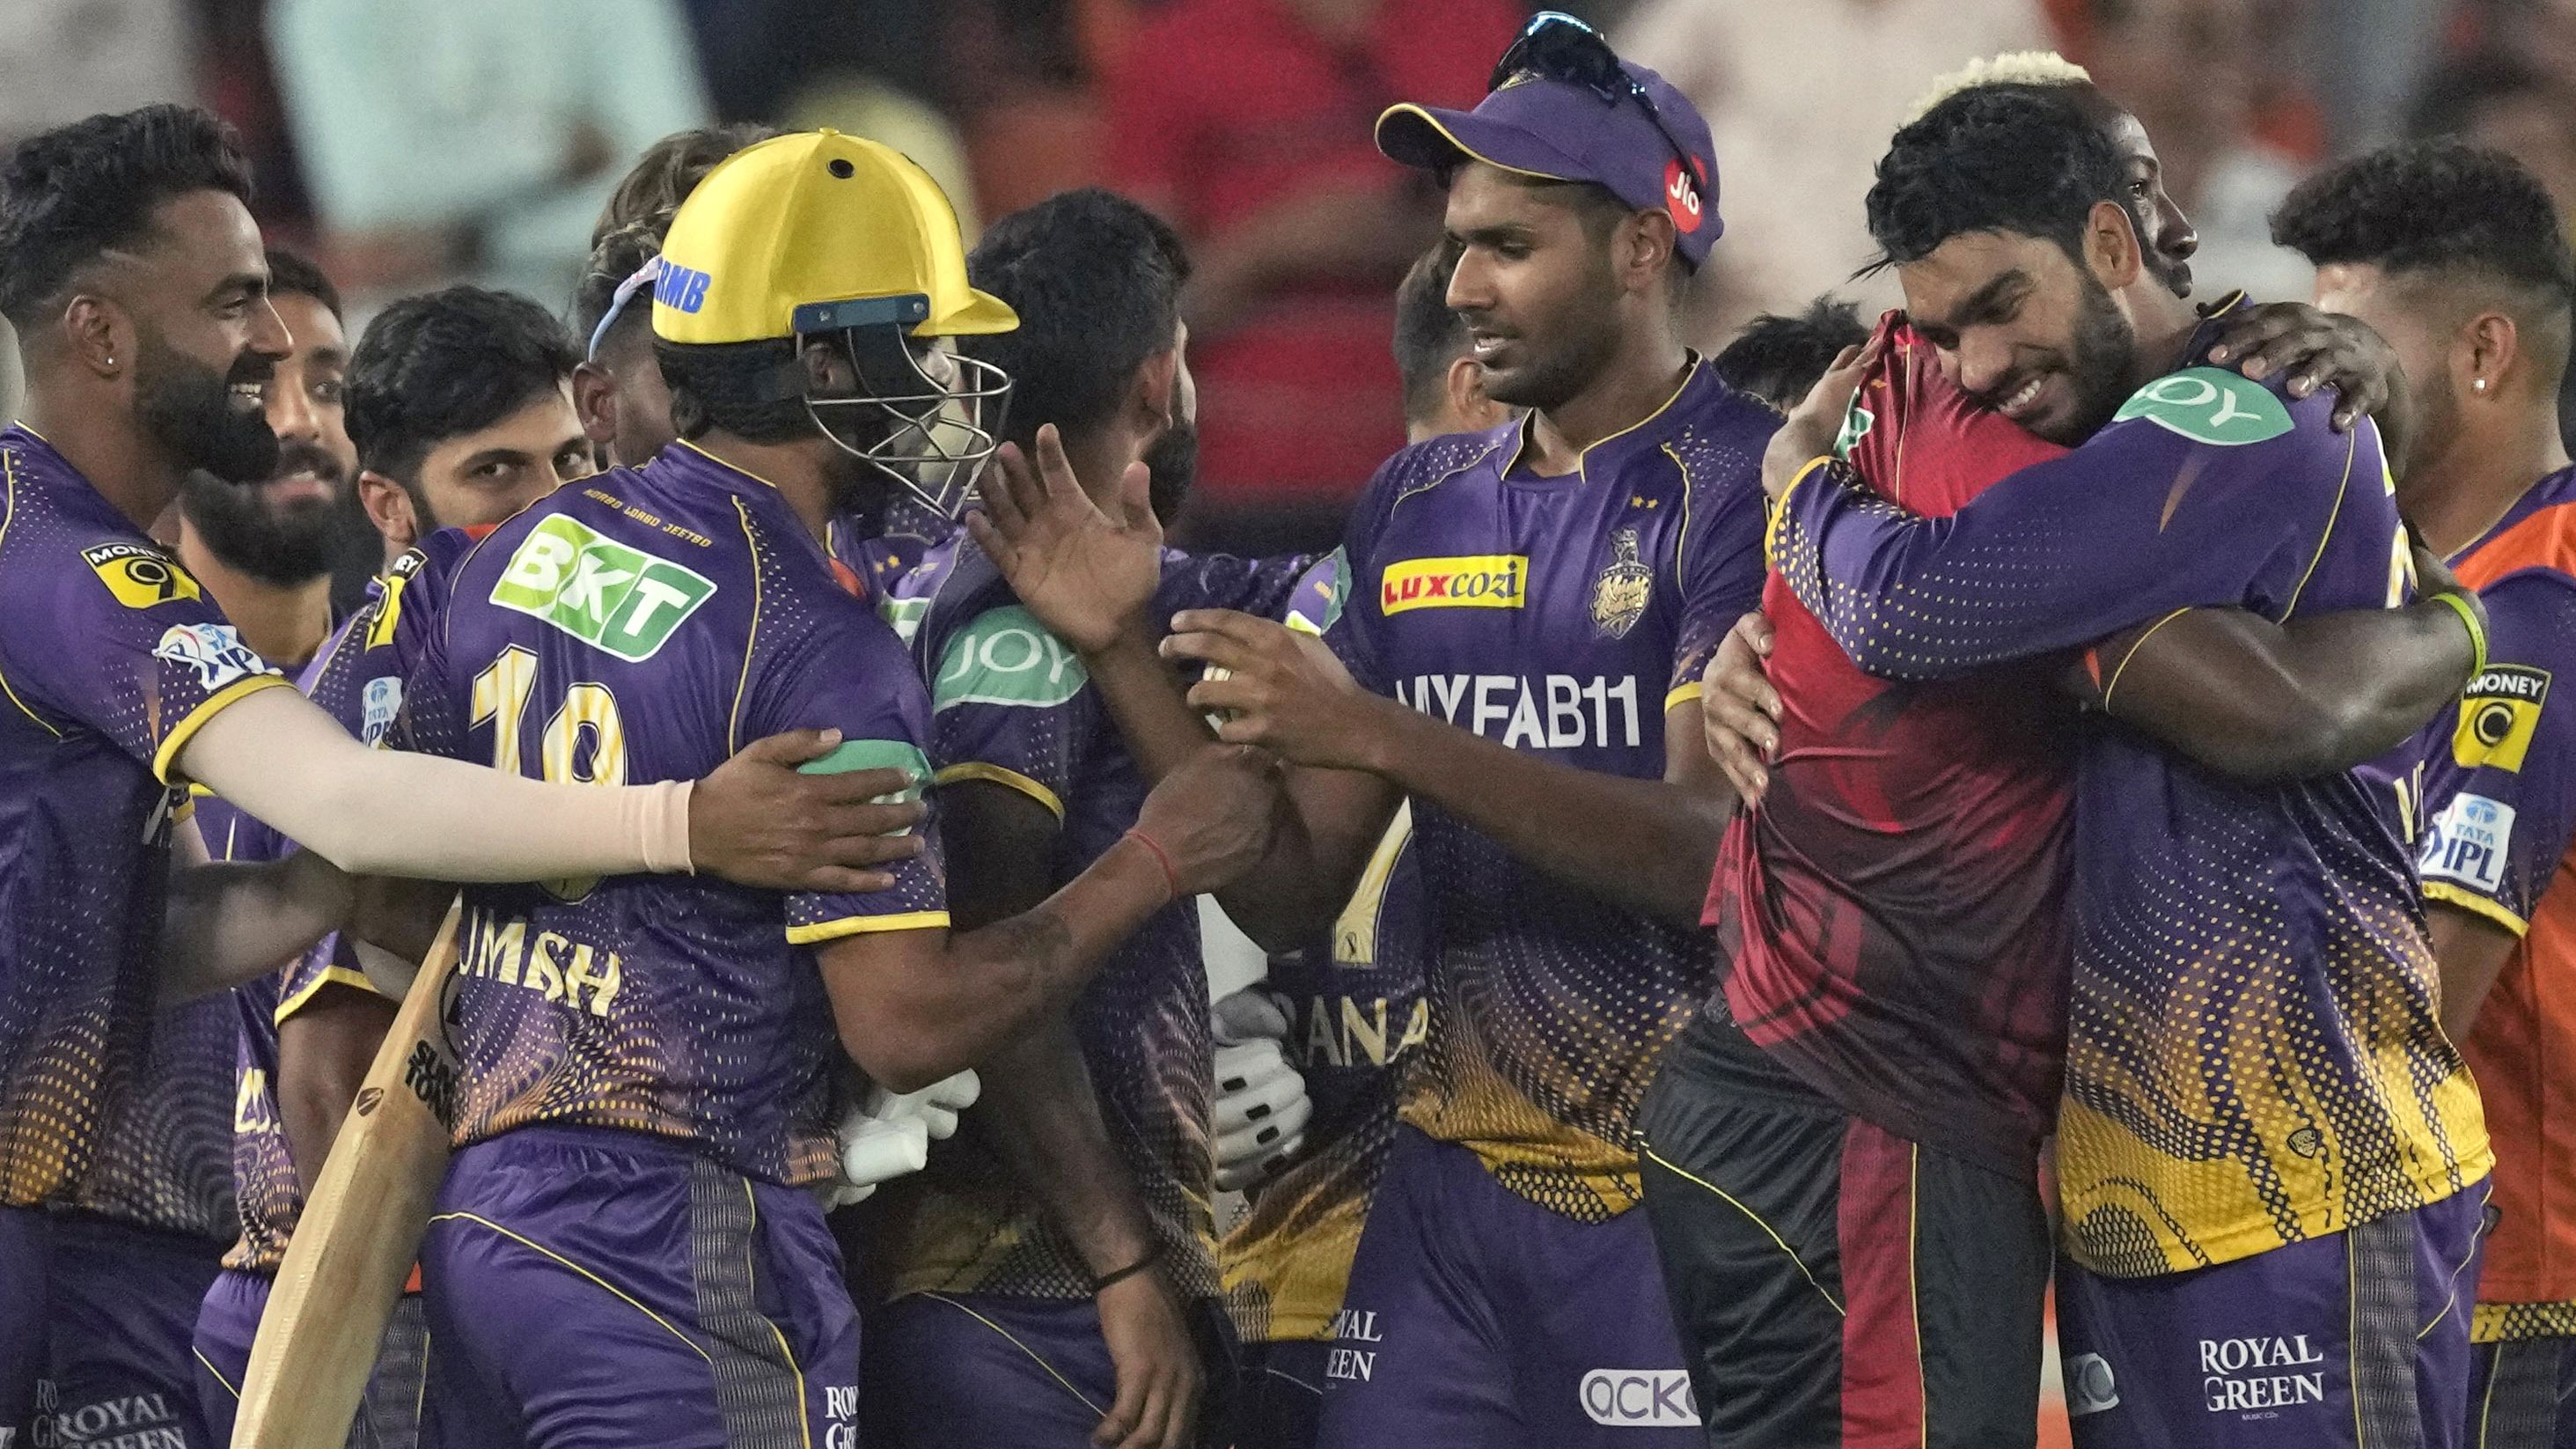 'One of the greatest heists': Batter stuns IPL with extraordinary match-winning performance 